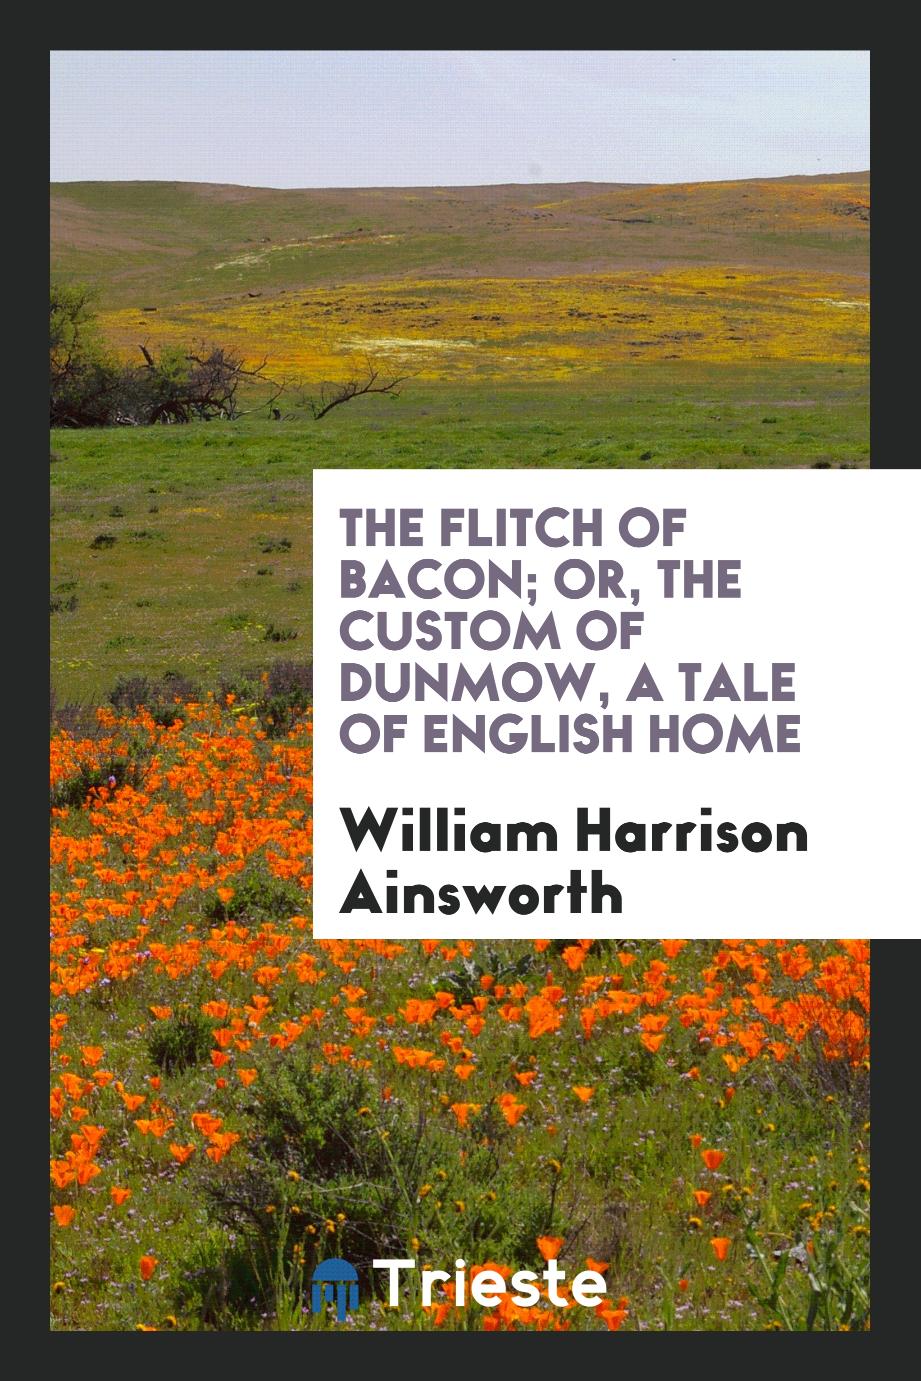 The Flitch of Bacon; Or, The Custom of Dunmow, a Tale of English Home